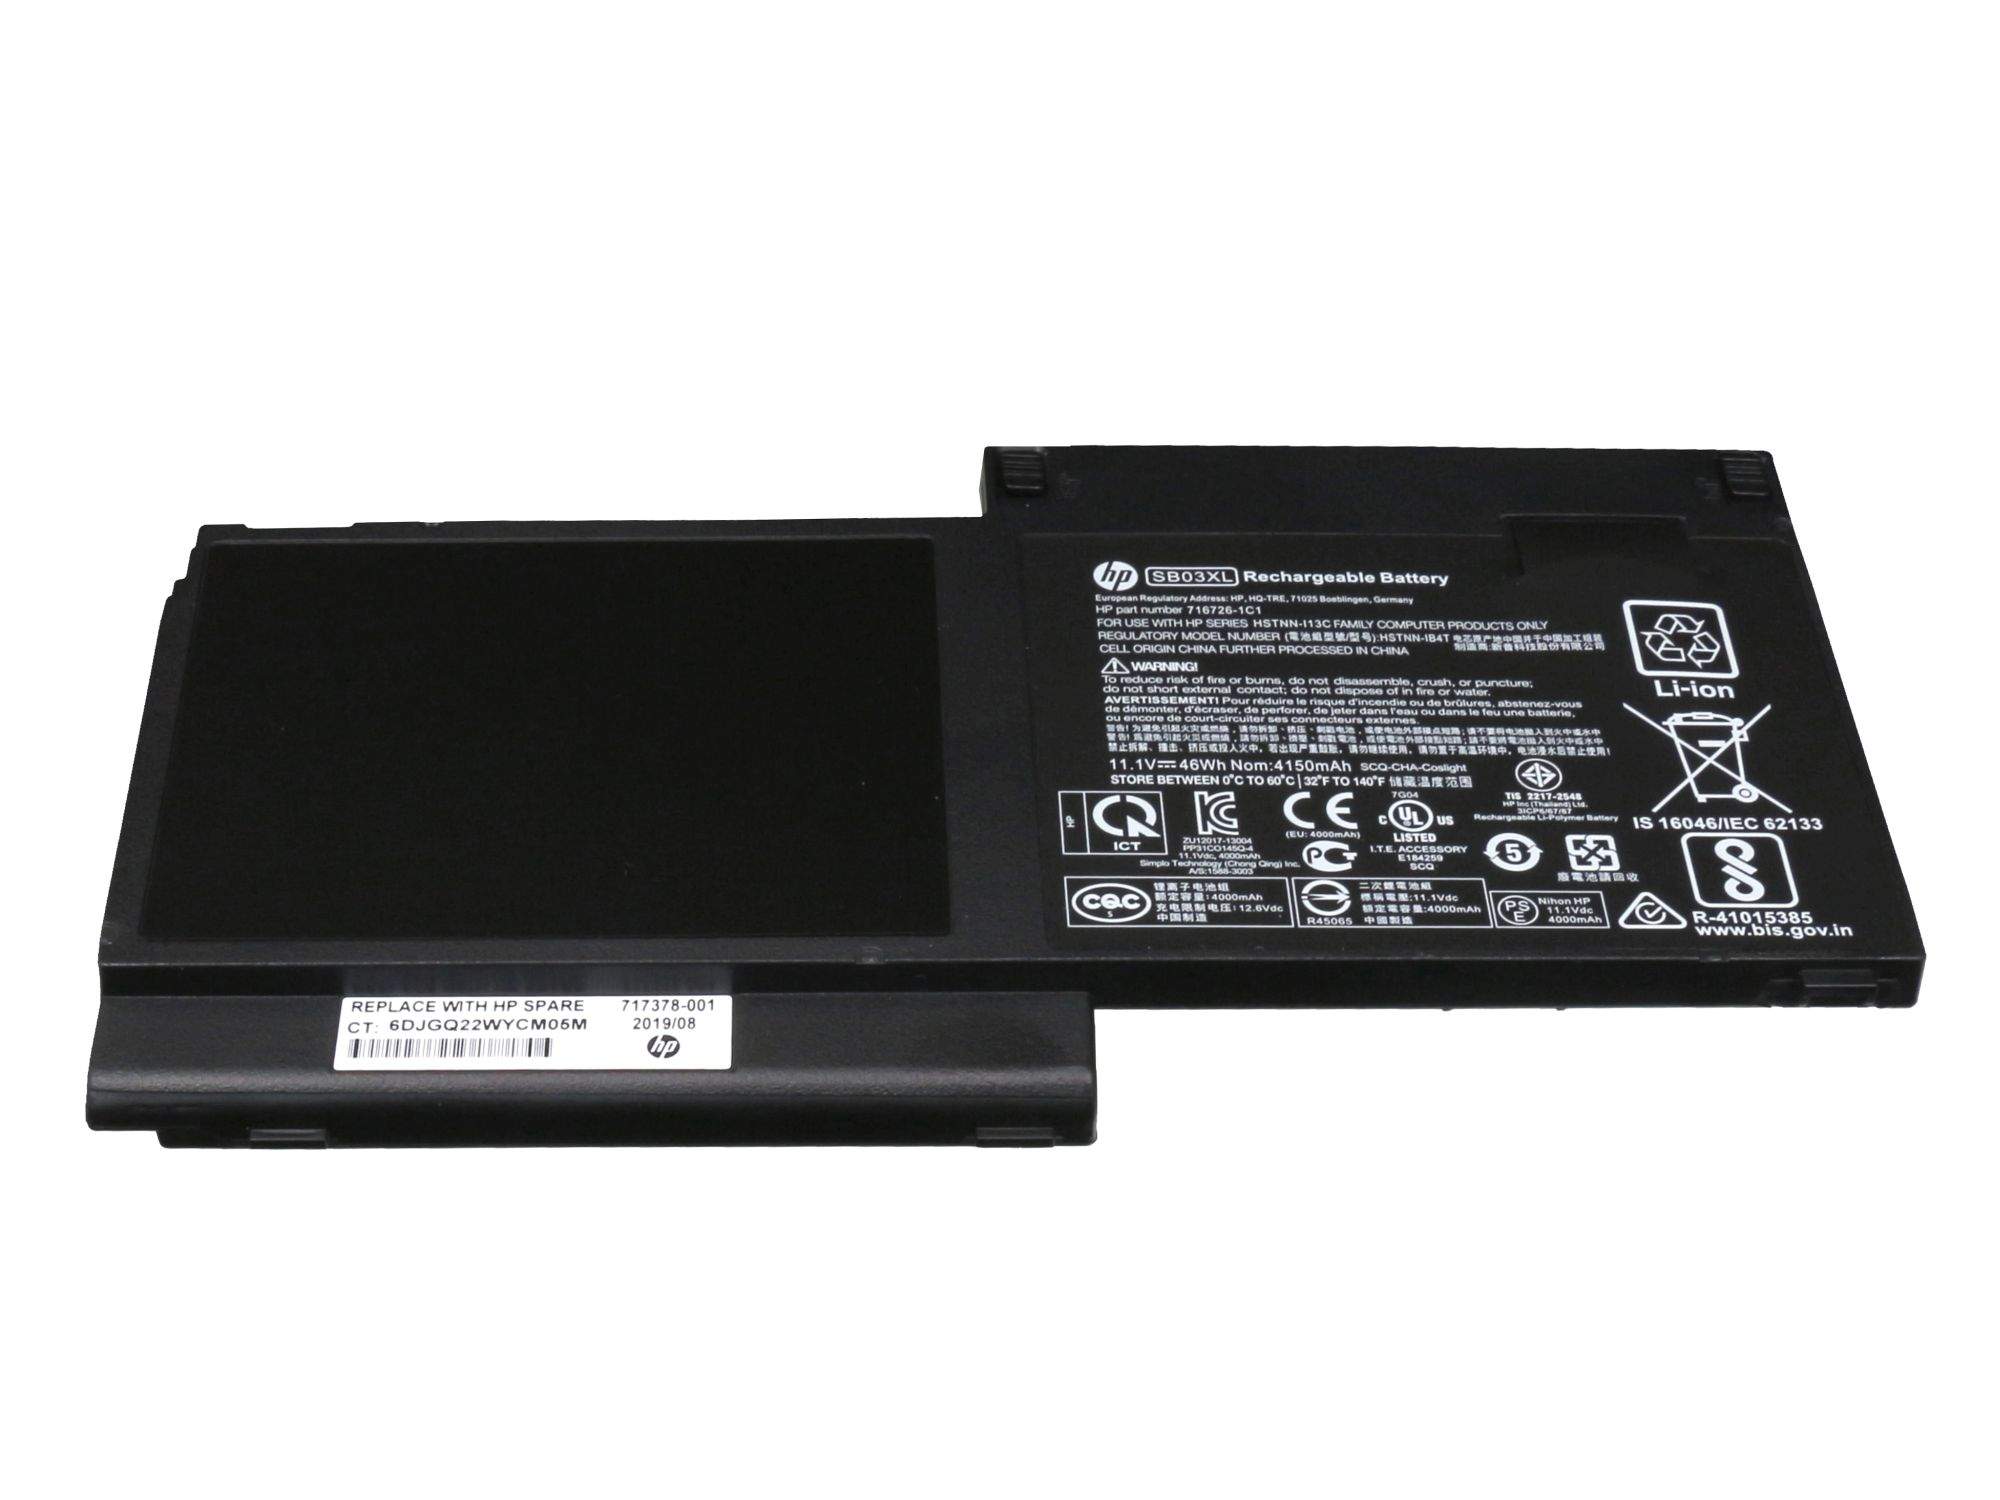 HP Battery 3 cells 46 WHr 4.5 AH